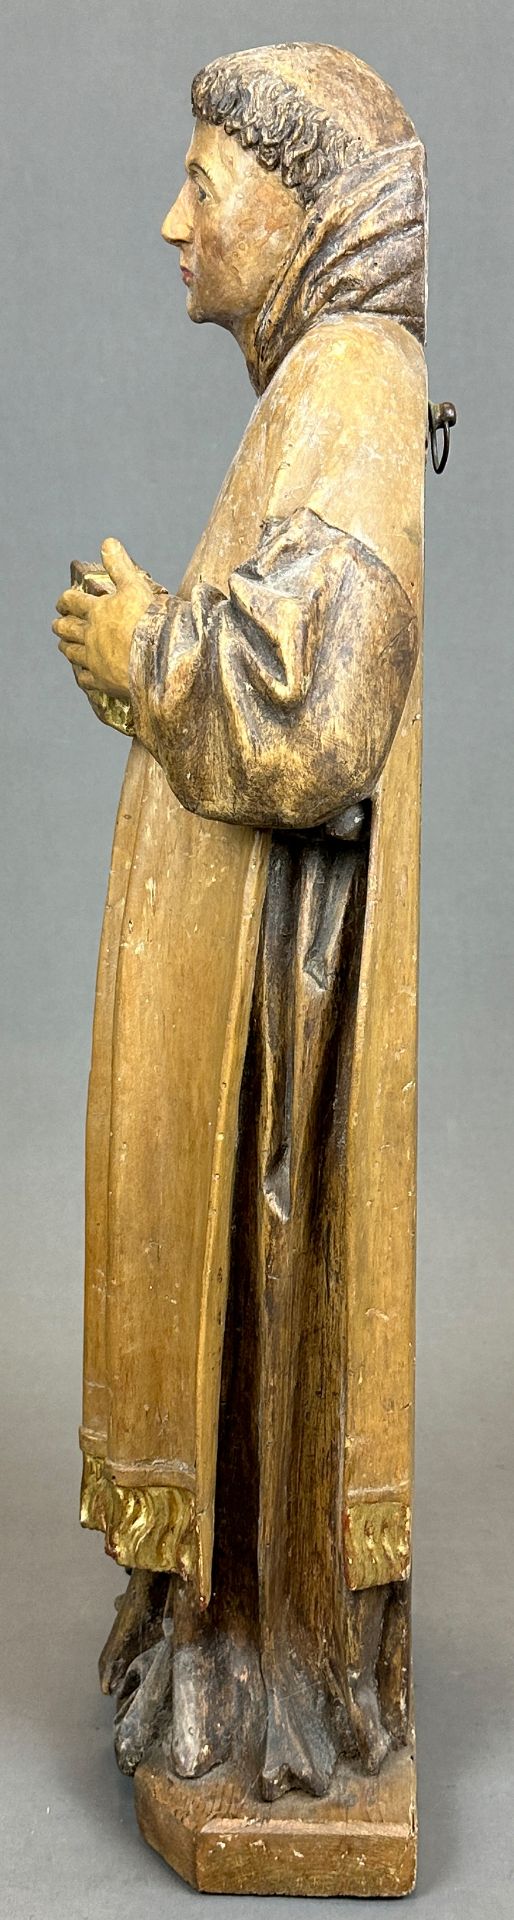 Wooden figure. Monk with book. Last third of the 17th century. South Germany. - Image 2 of 9